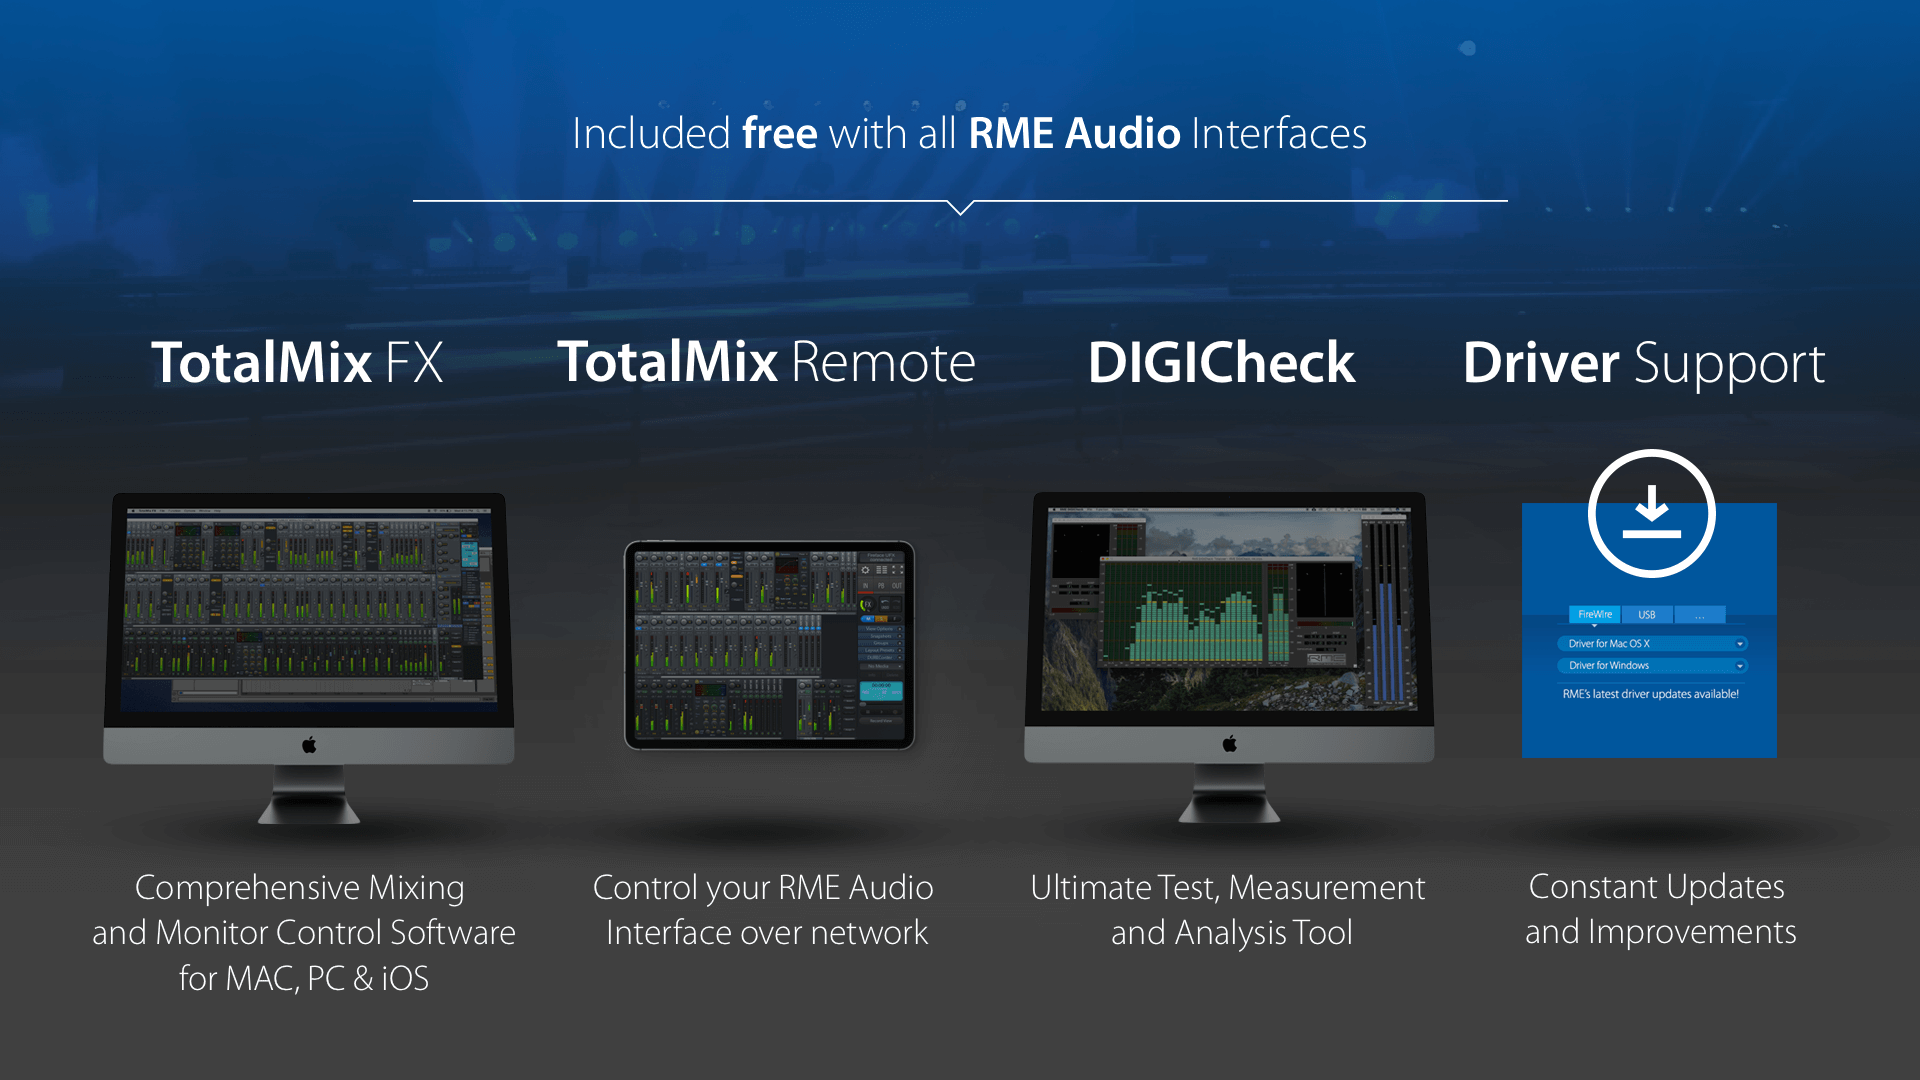 Free Software with any RME Audio Interface